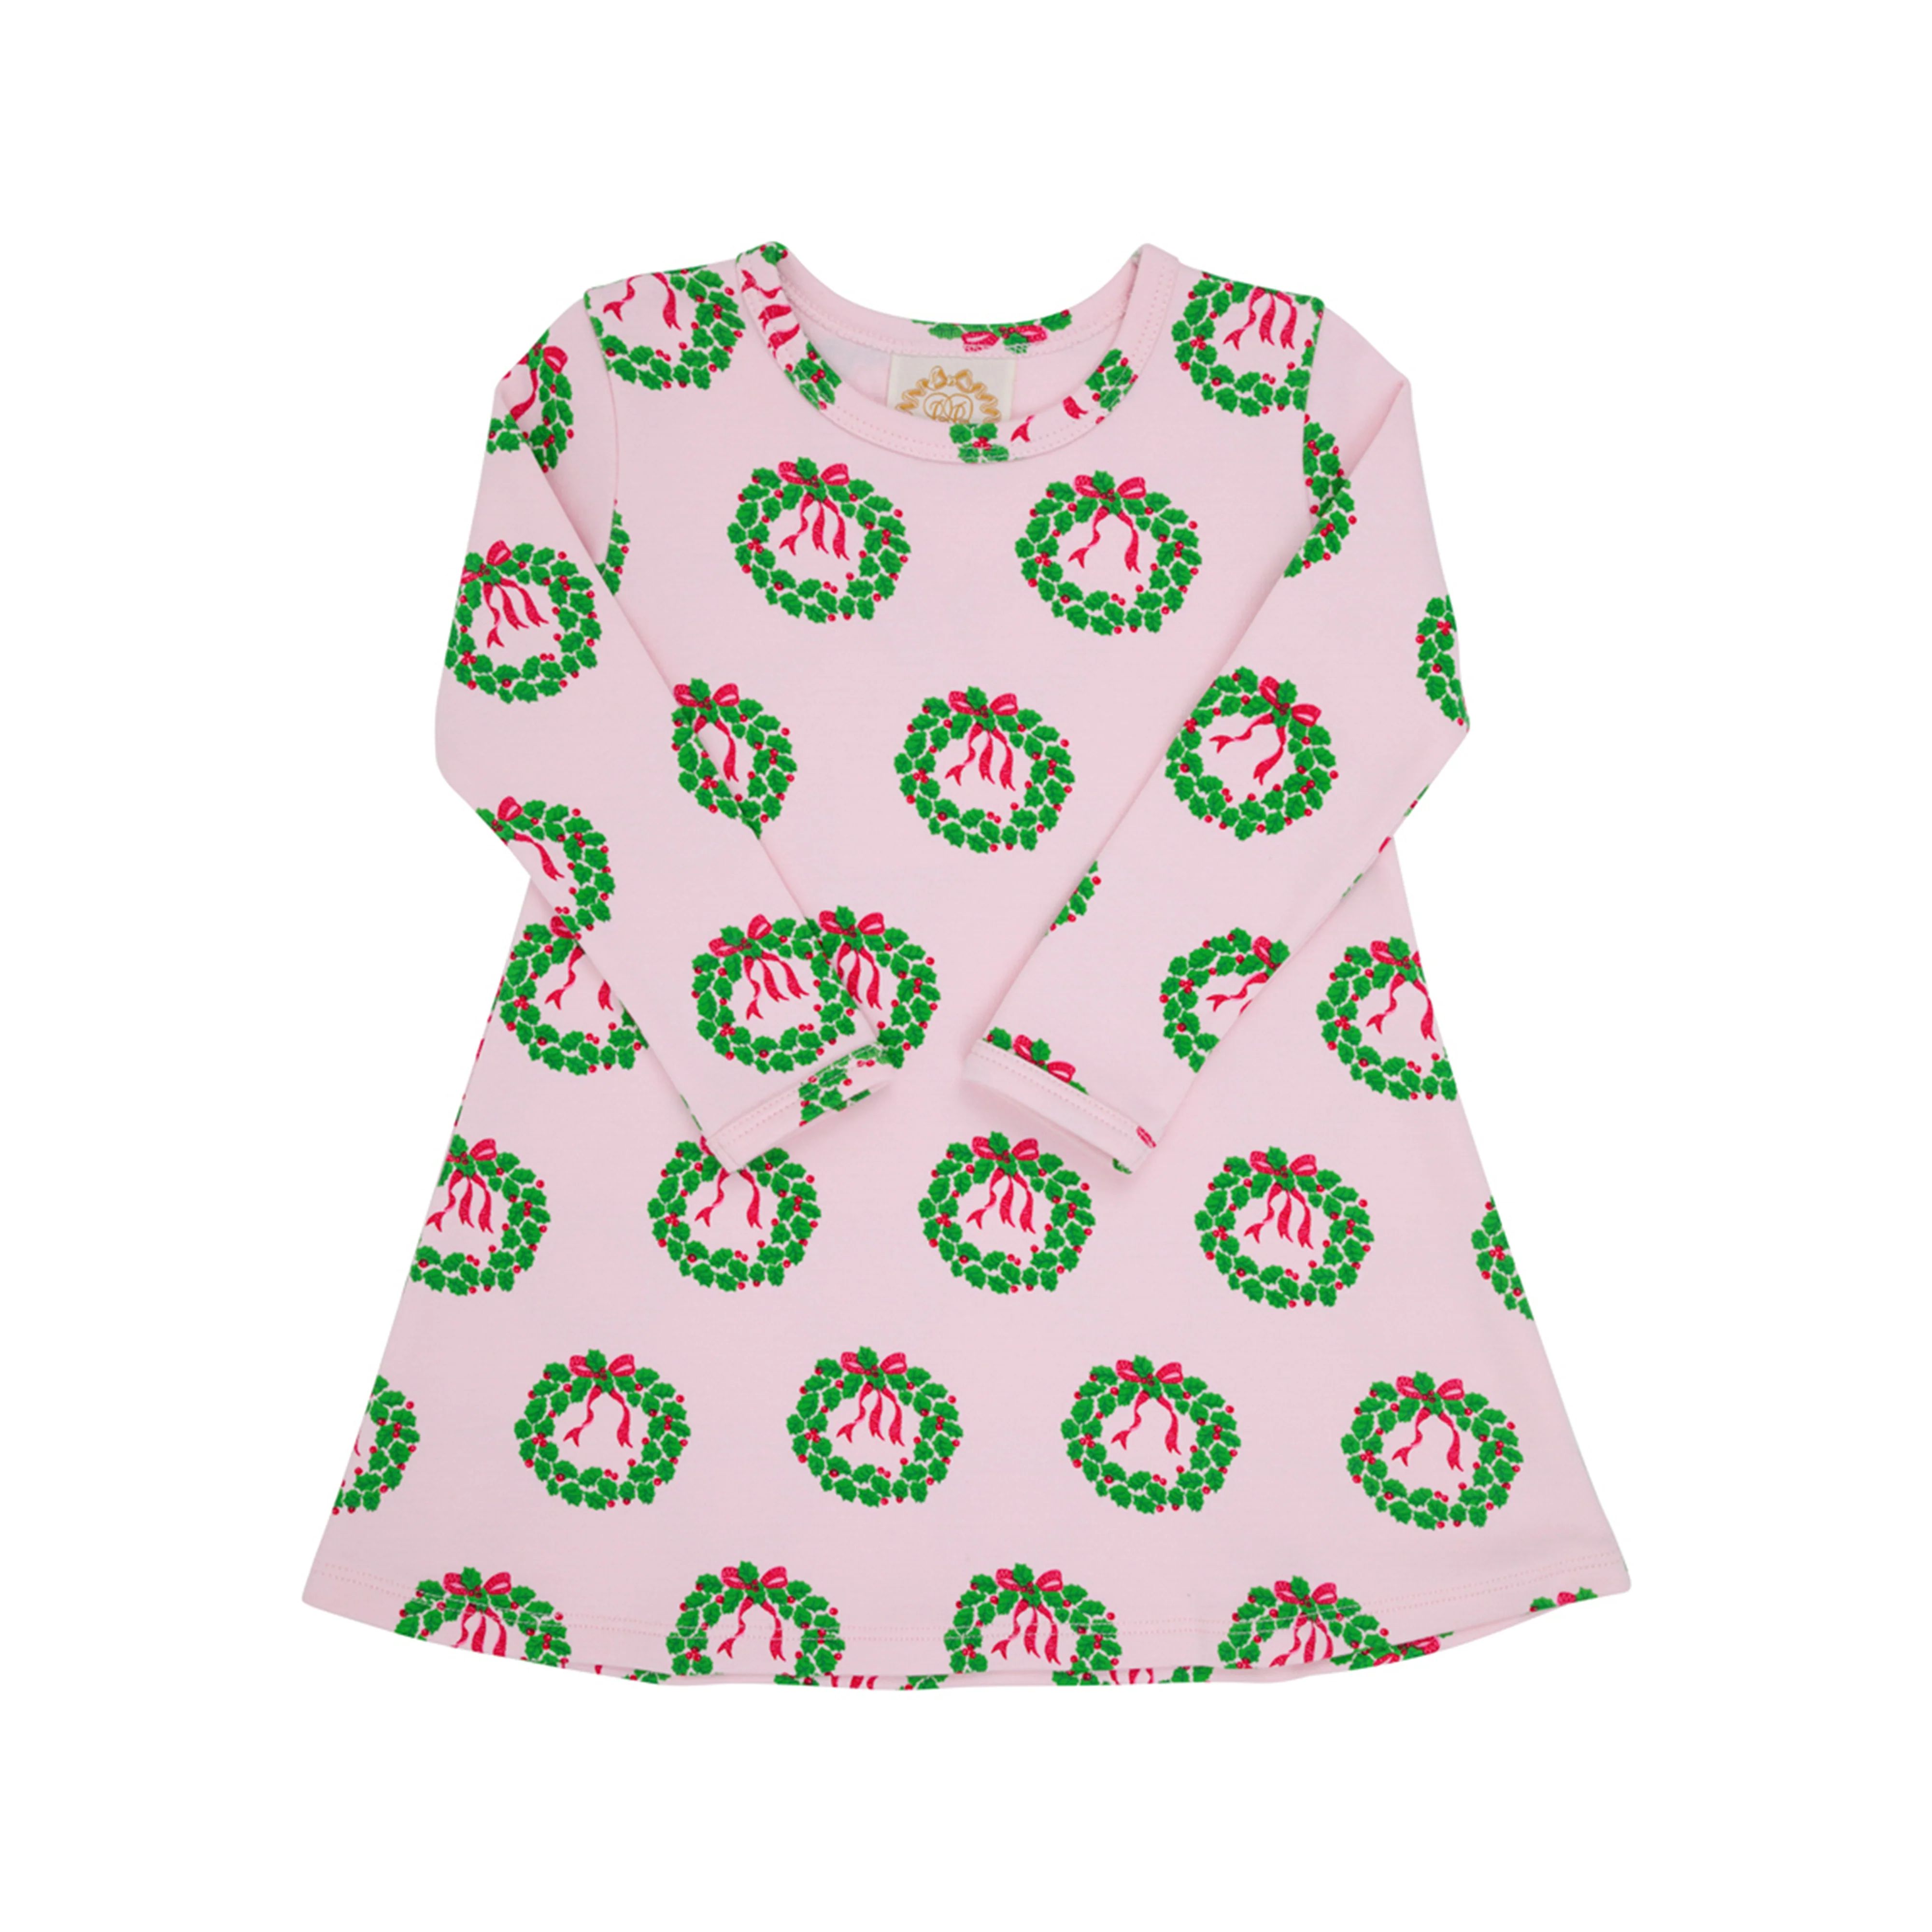 Long Sleeve Polly Play Dress - Deck The Halls with Bows & Holly | The Beaufort Bonnet Company